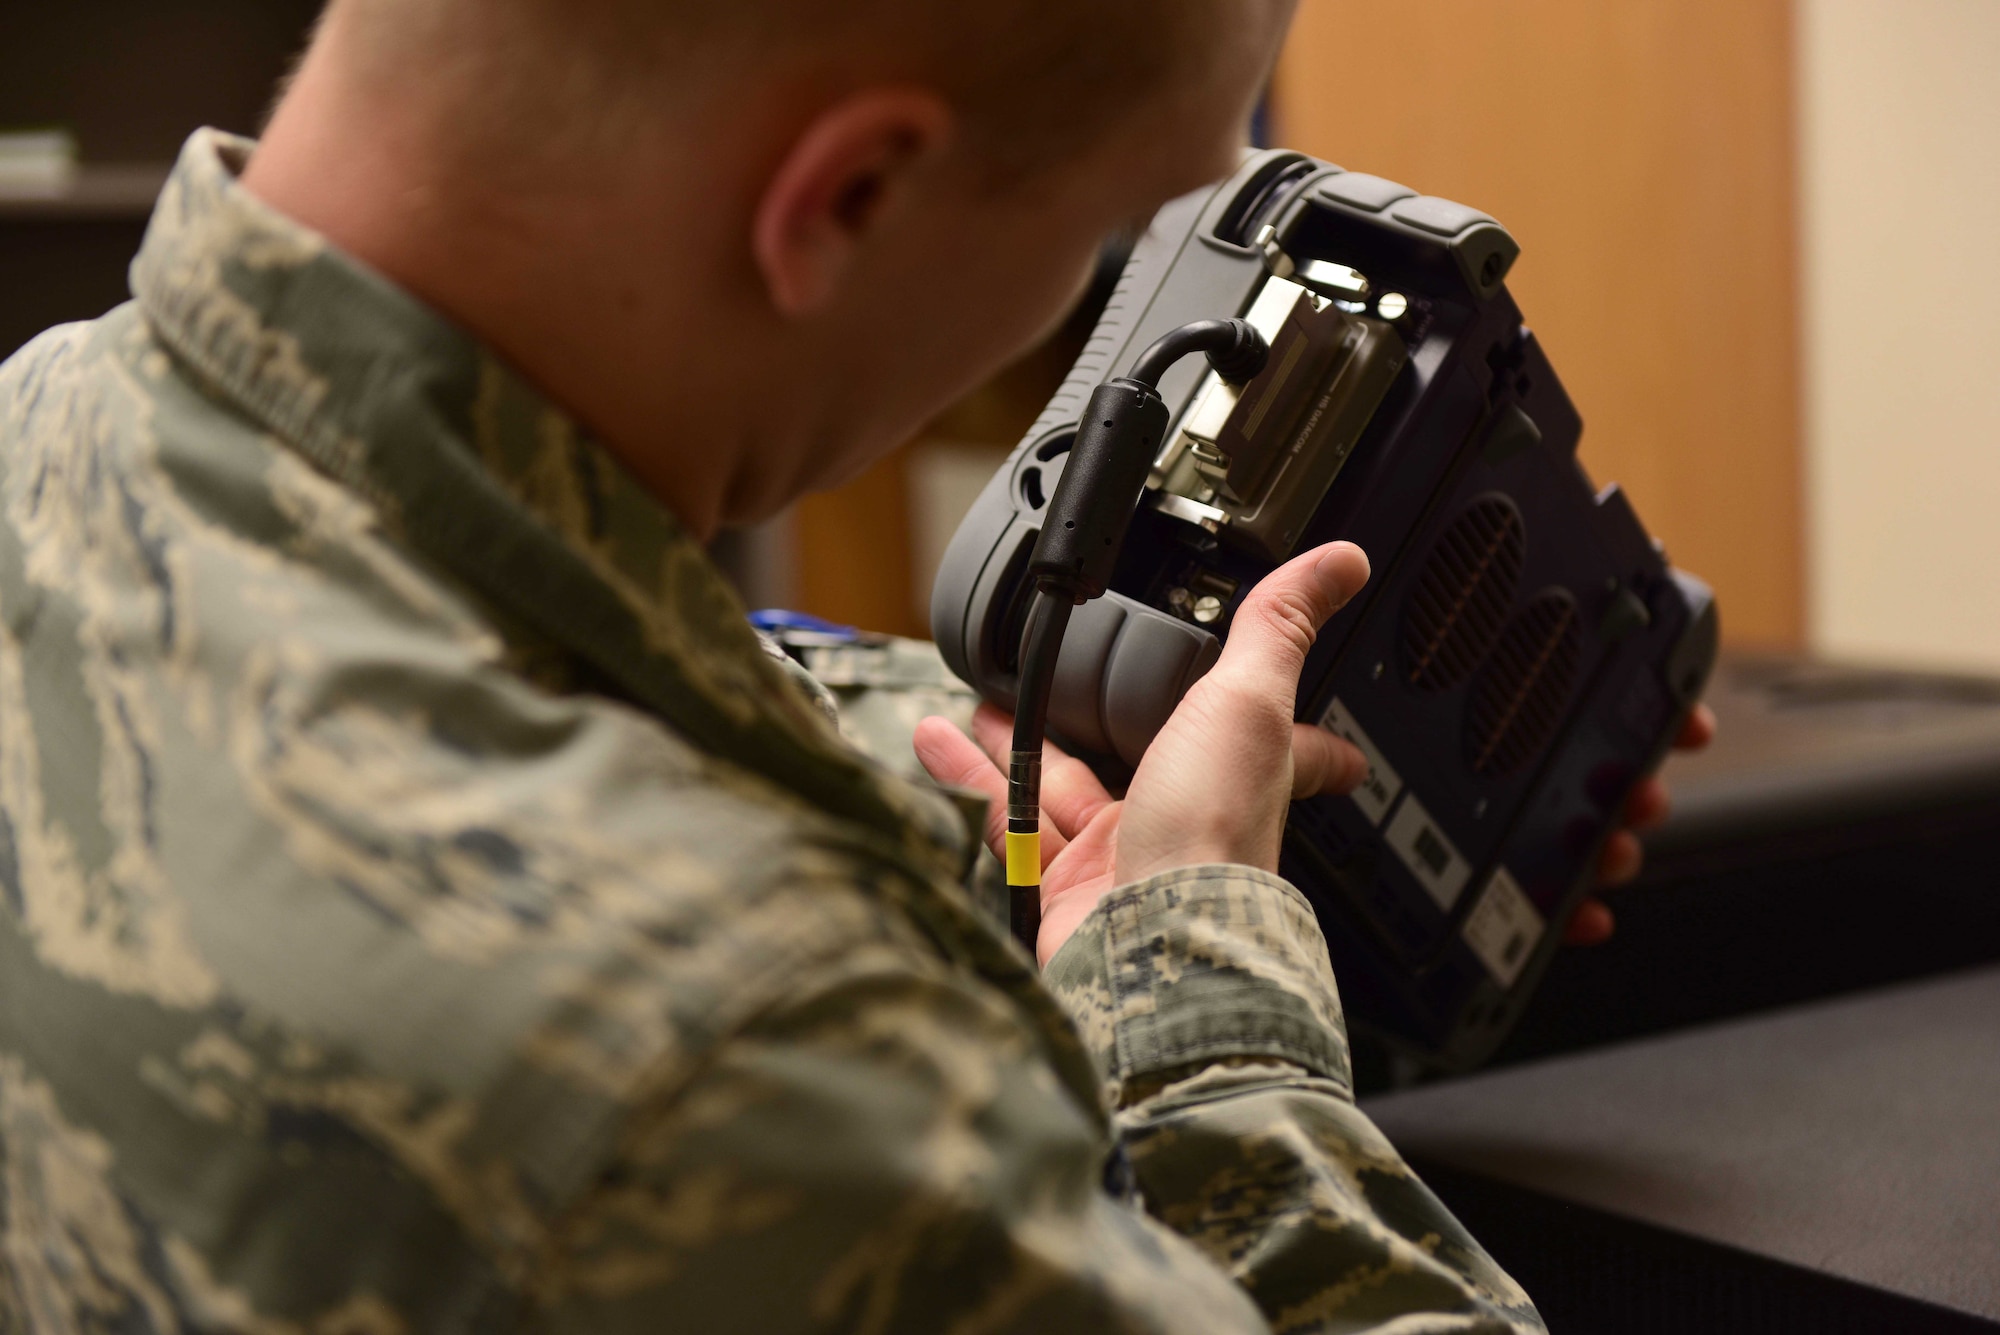 2nd Lt. Eric, 432nd Aircraft Communications Maintenance Squadron Mission Defense Team assistant officer in charge, checks communications equipment at Creech Air Force Base, Nevada, April 29, 2019. To increase the defense of the Remotely Piloted Aircraft cyber network, the Air Combat Command selected the 432nd ACMS at Creech to be the first squadron to test the possibilities of the Cyber Squadron Initiative (CS-I). (U.S. Air Force photo by Airman 1st Class Haley Stevens)